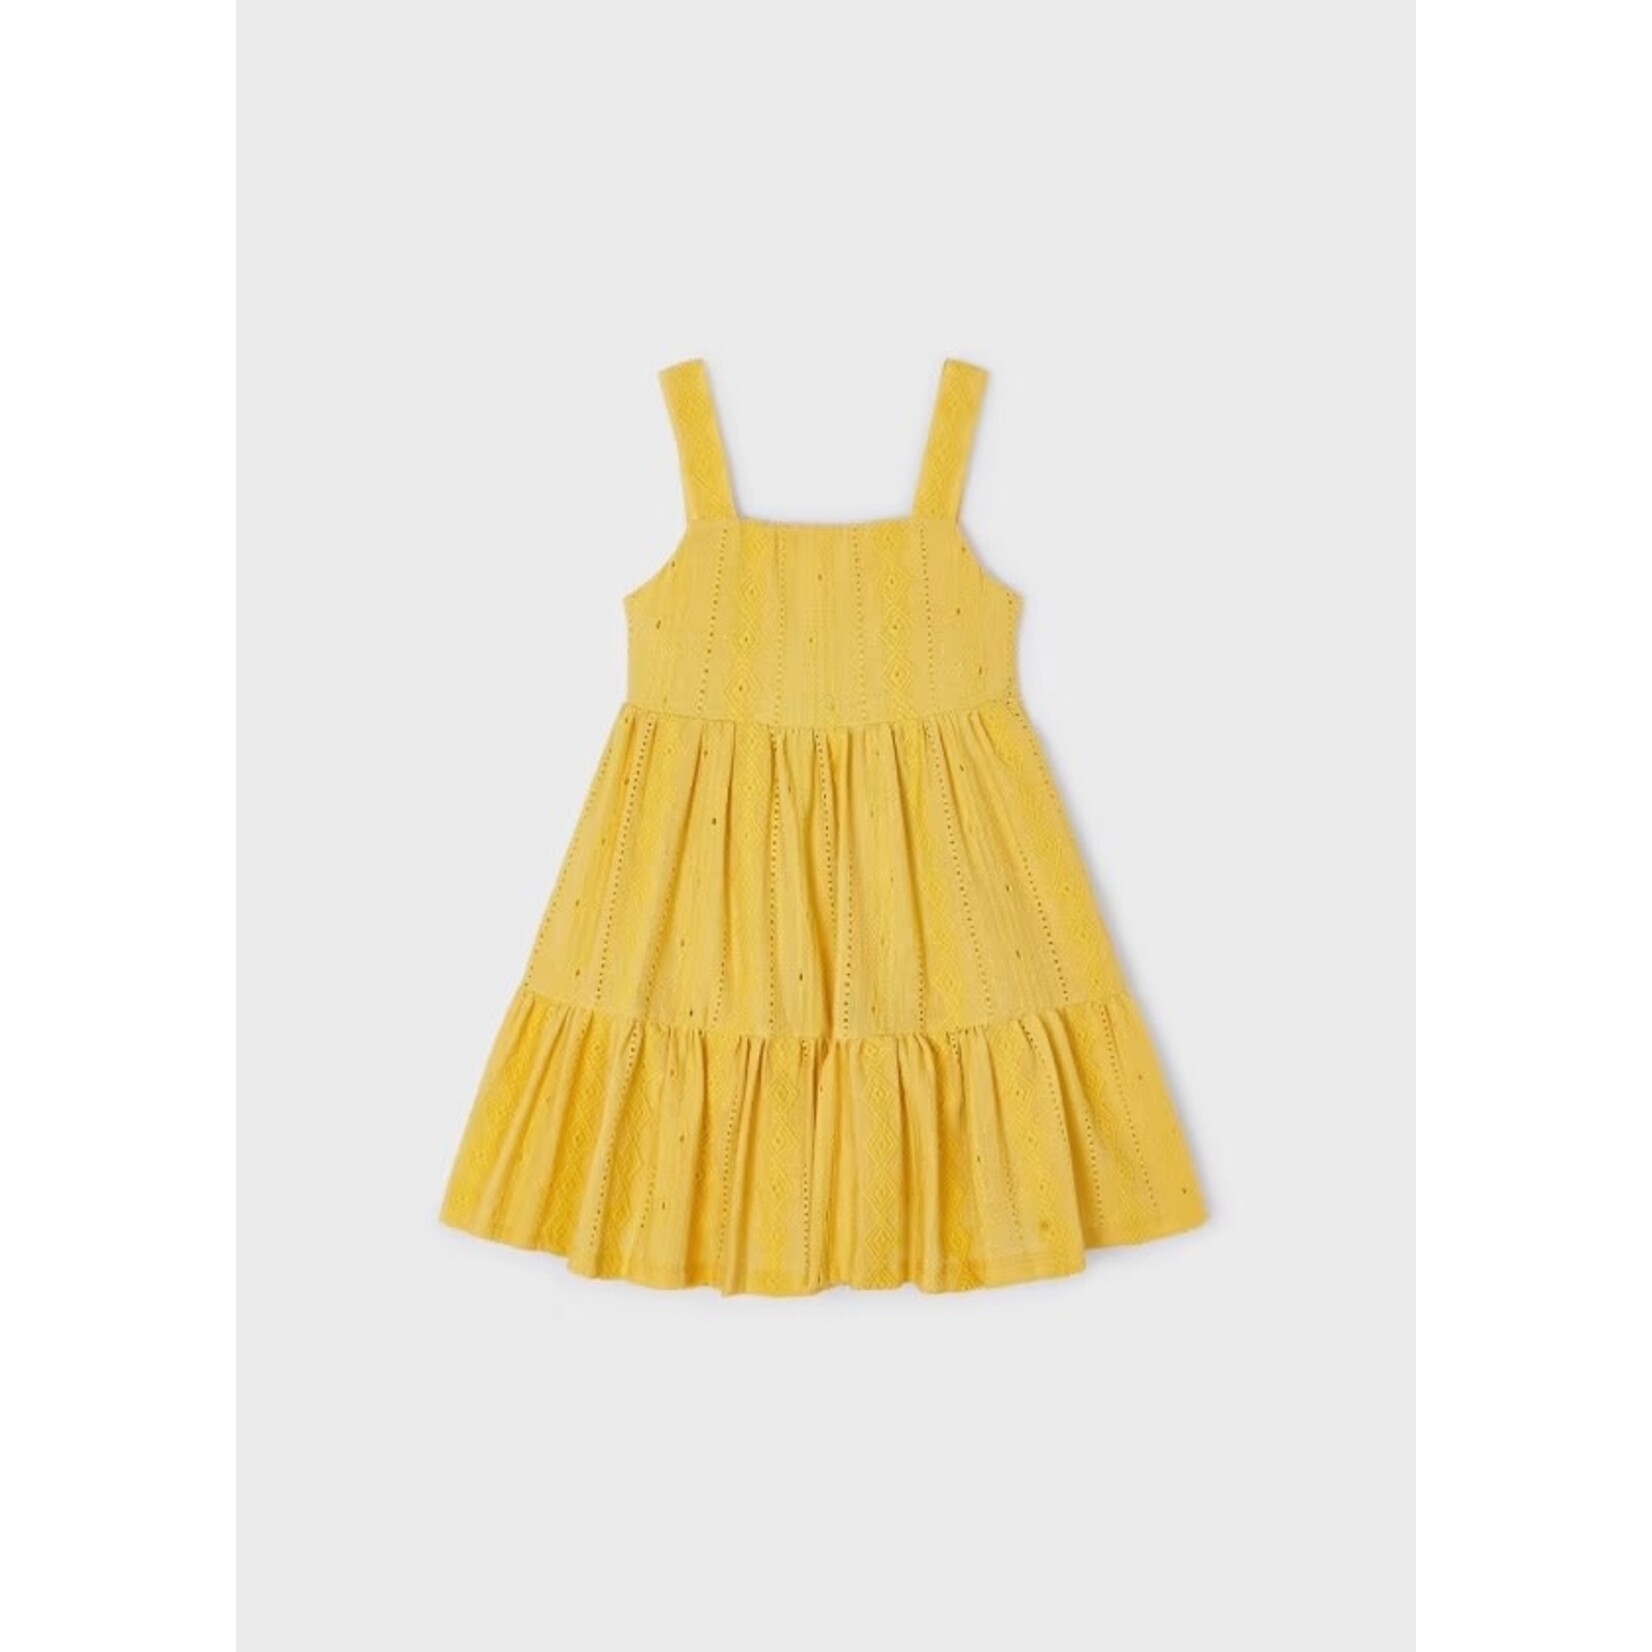 Mayoral MAYORAL - Sleeveless yellow dress with embroideries